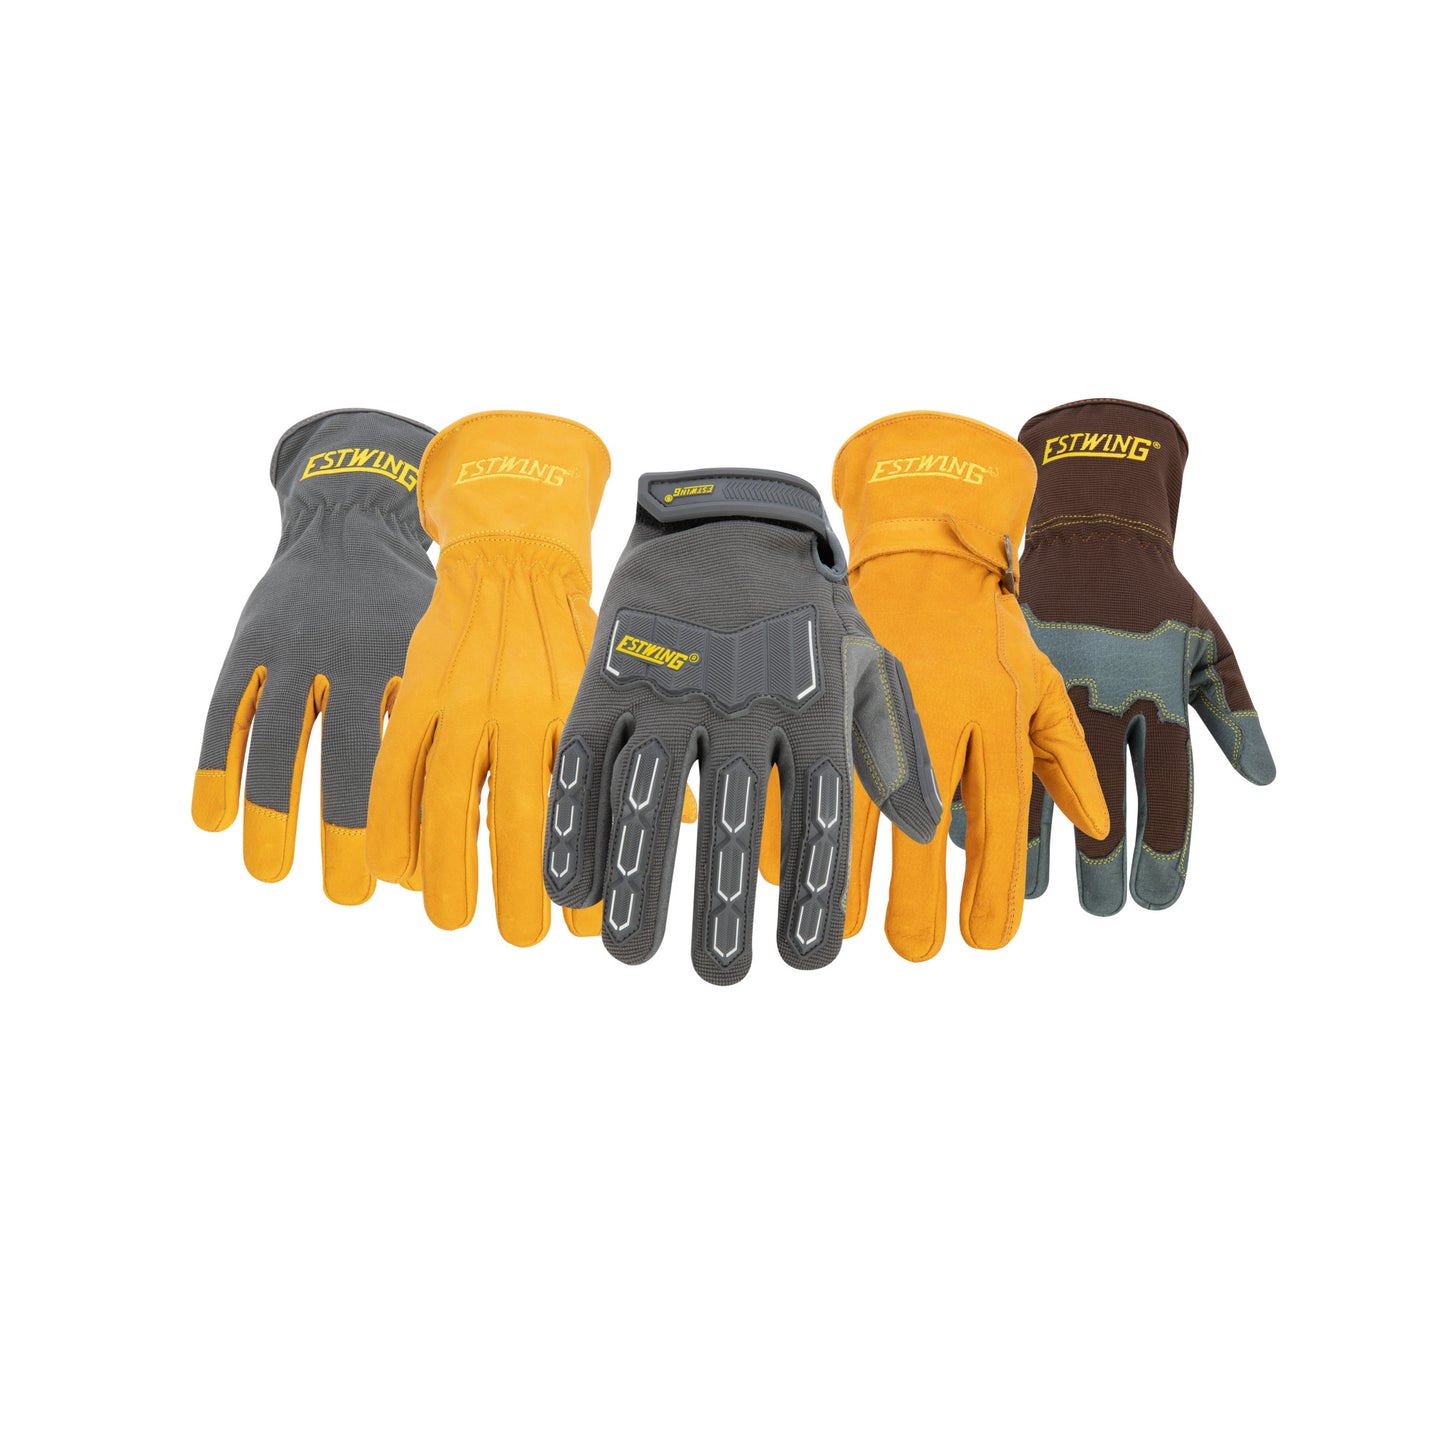 Impact Resistant Synthetic Leather Palm Work Glove with Anti-Vibration Palm